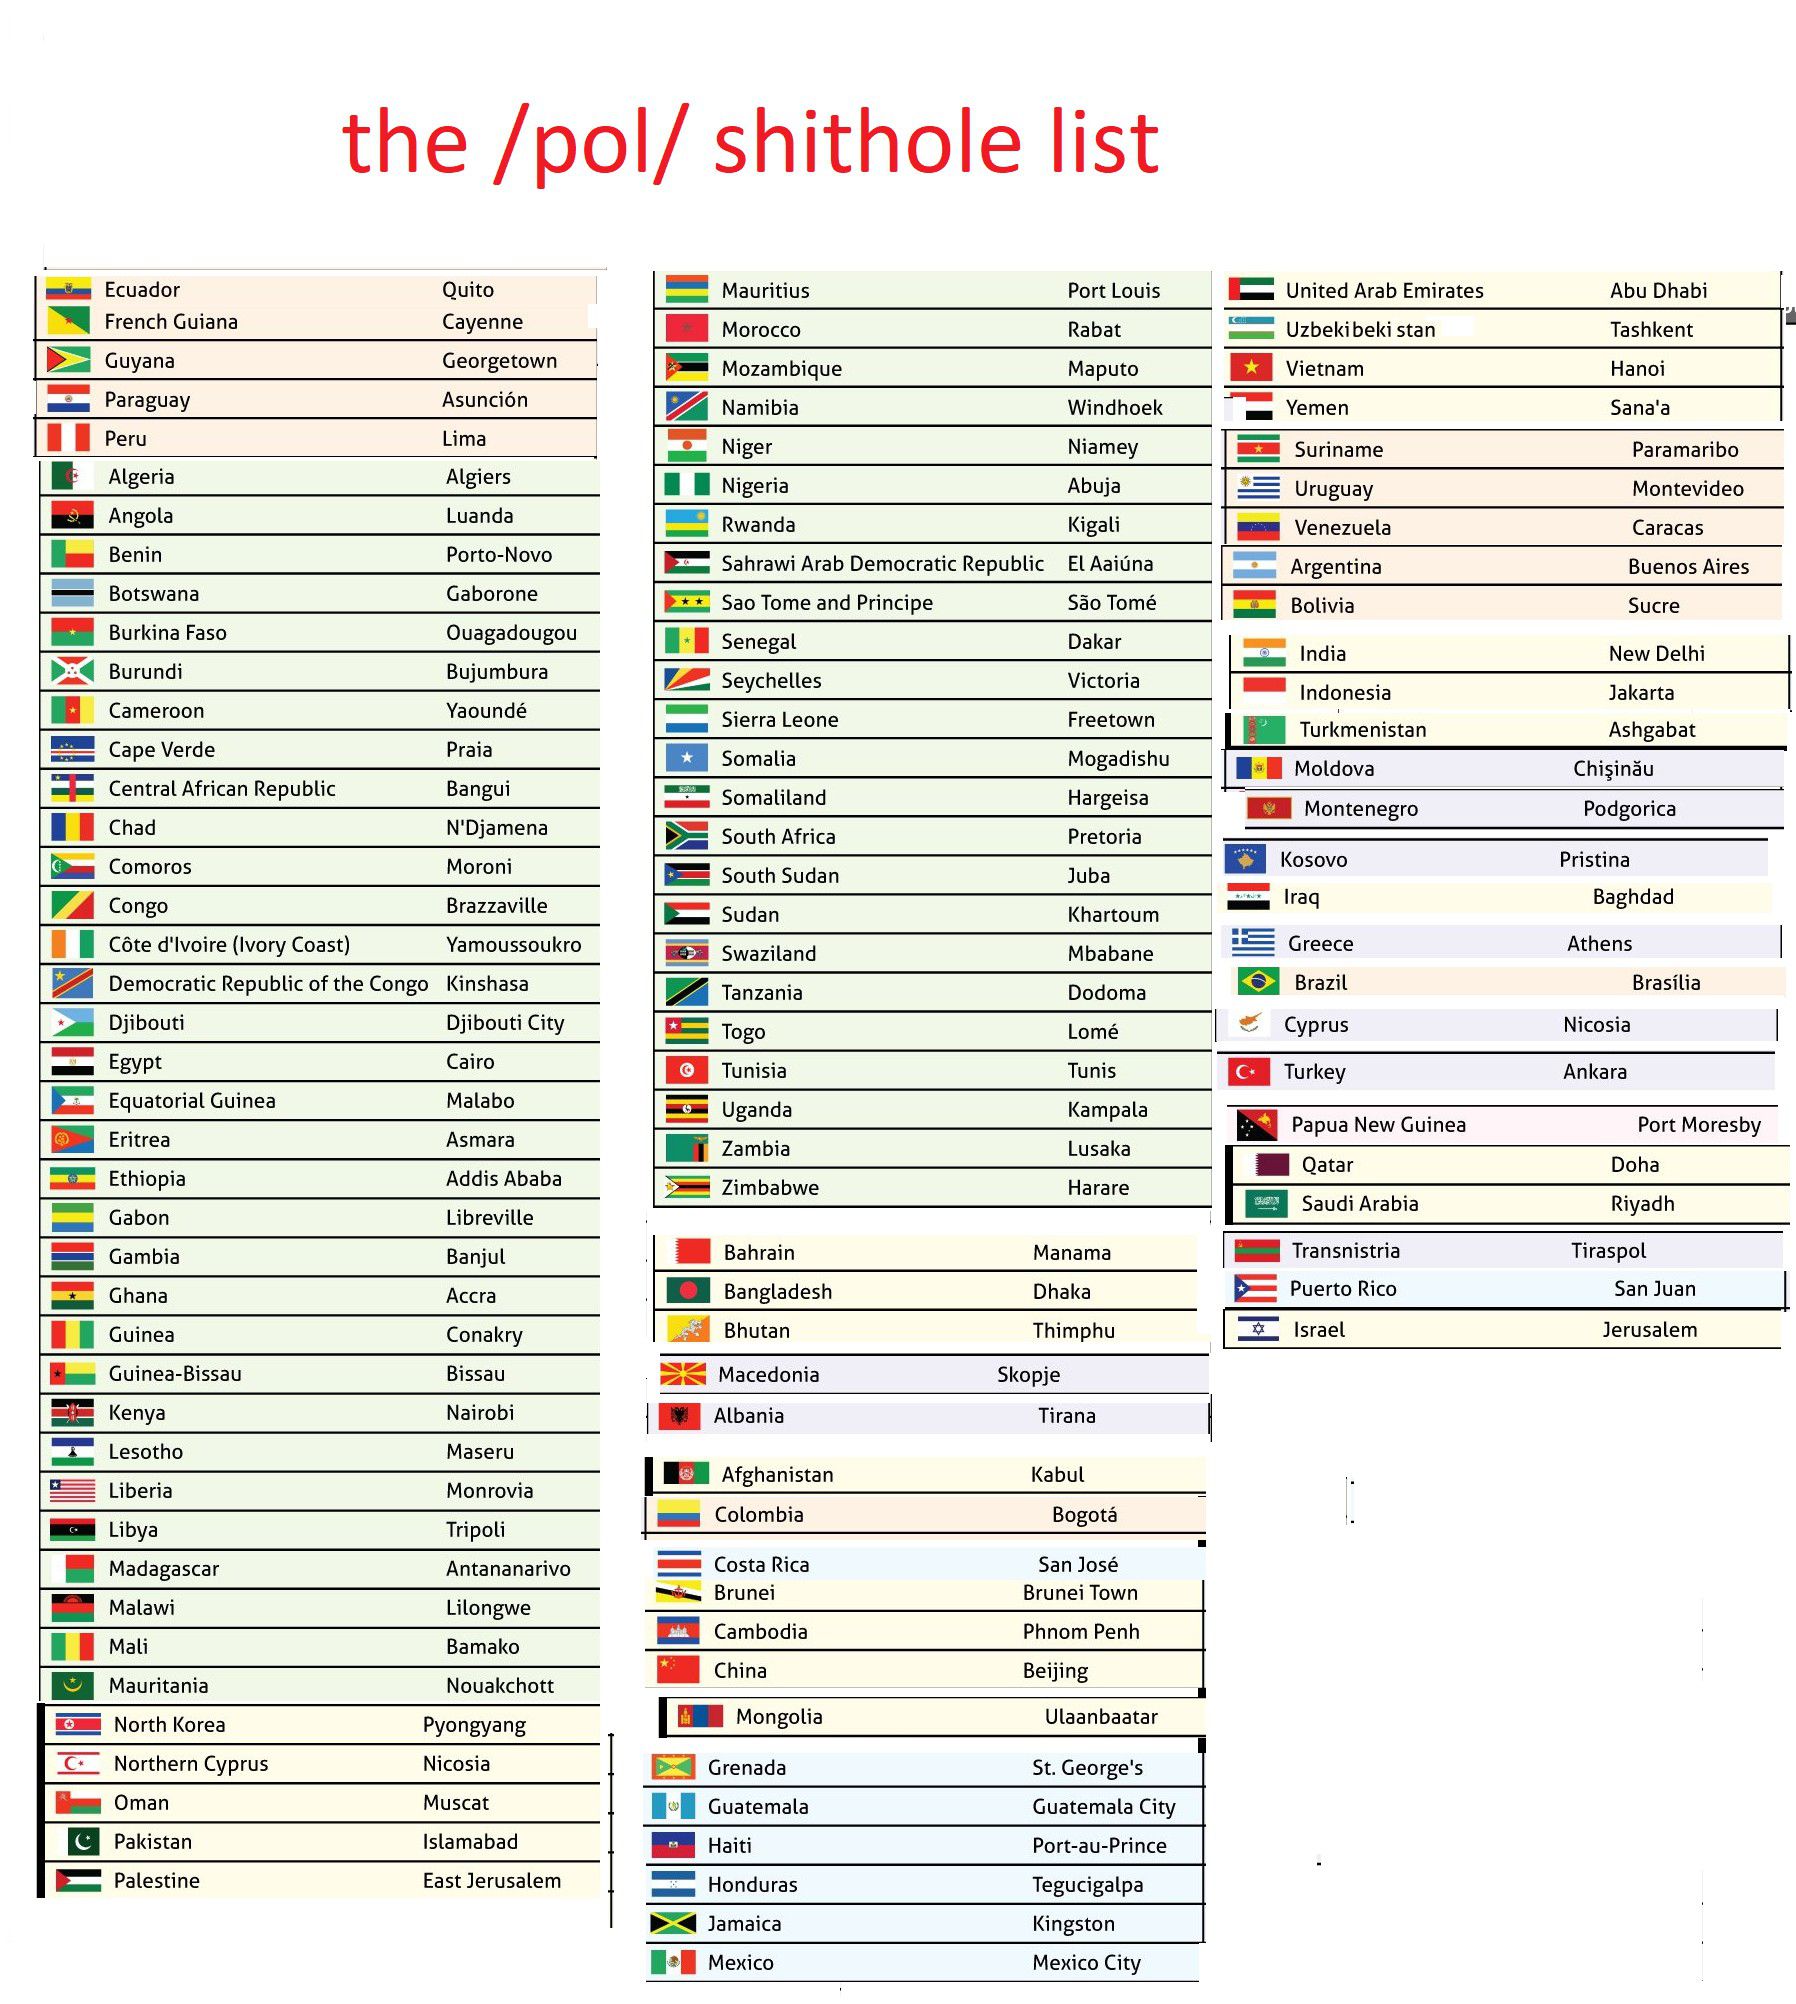 the real list of shitholes